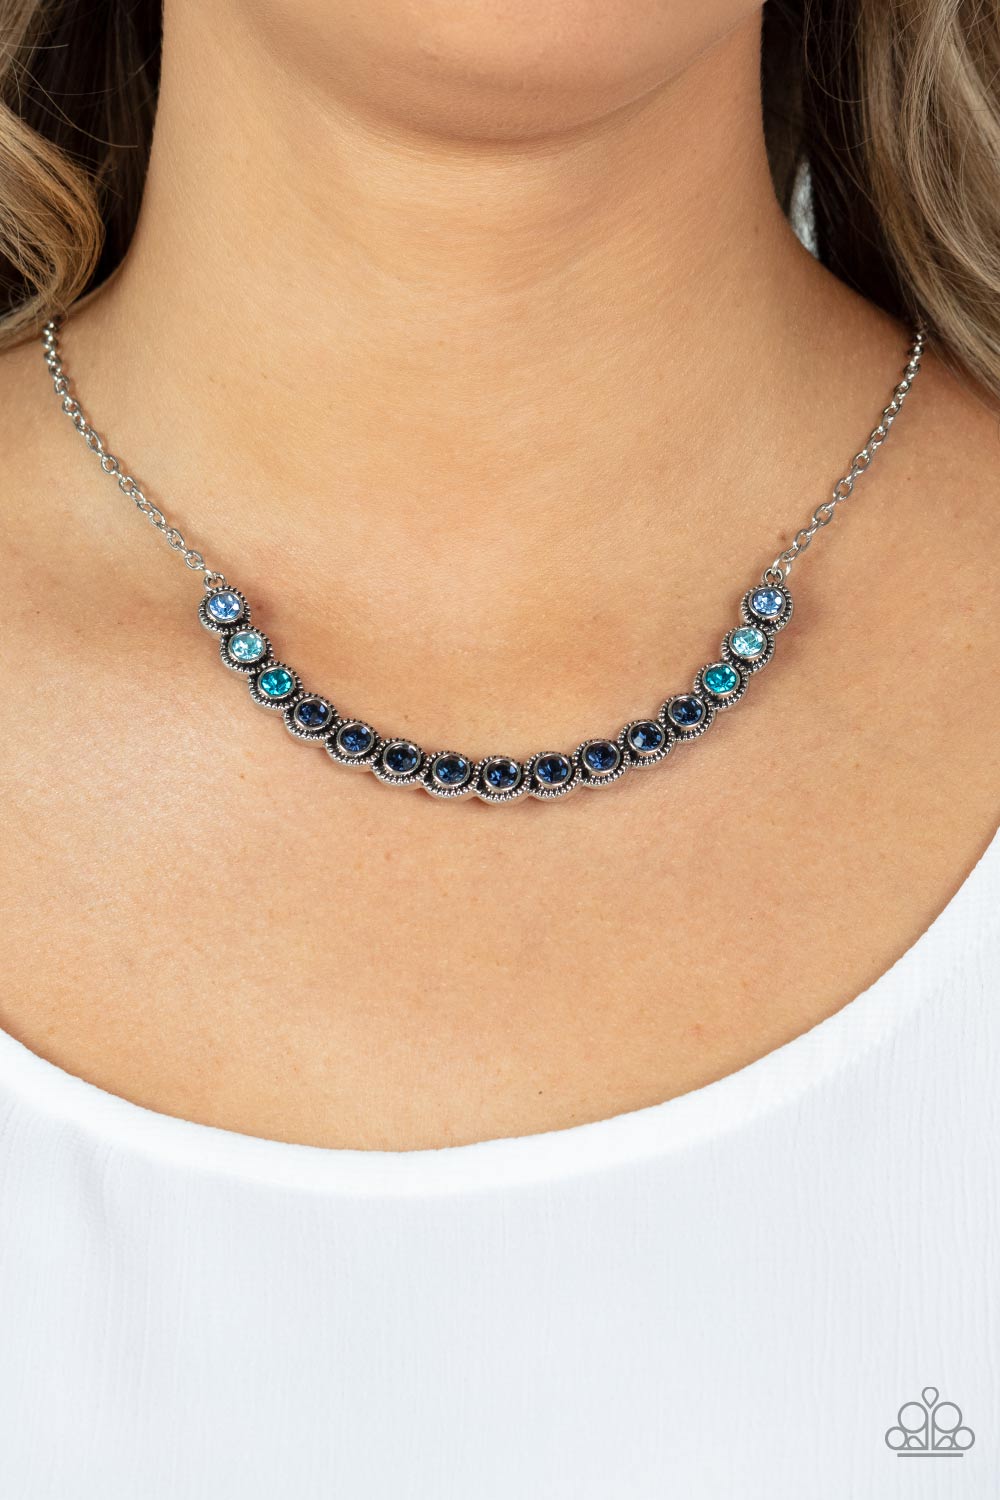 Throwing SHADES Blue Rhinestone Necklace - Paparazzi Accessories- lightbox - CarasShop.com - $5 Jewelry by Cara Jewels